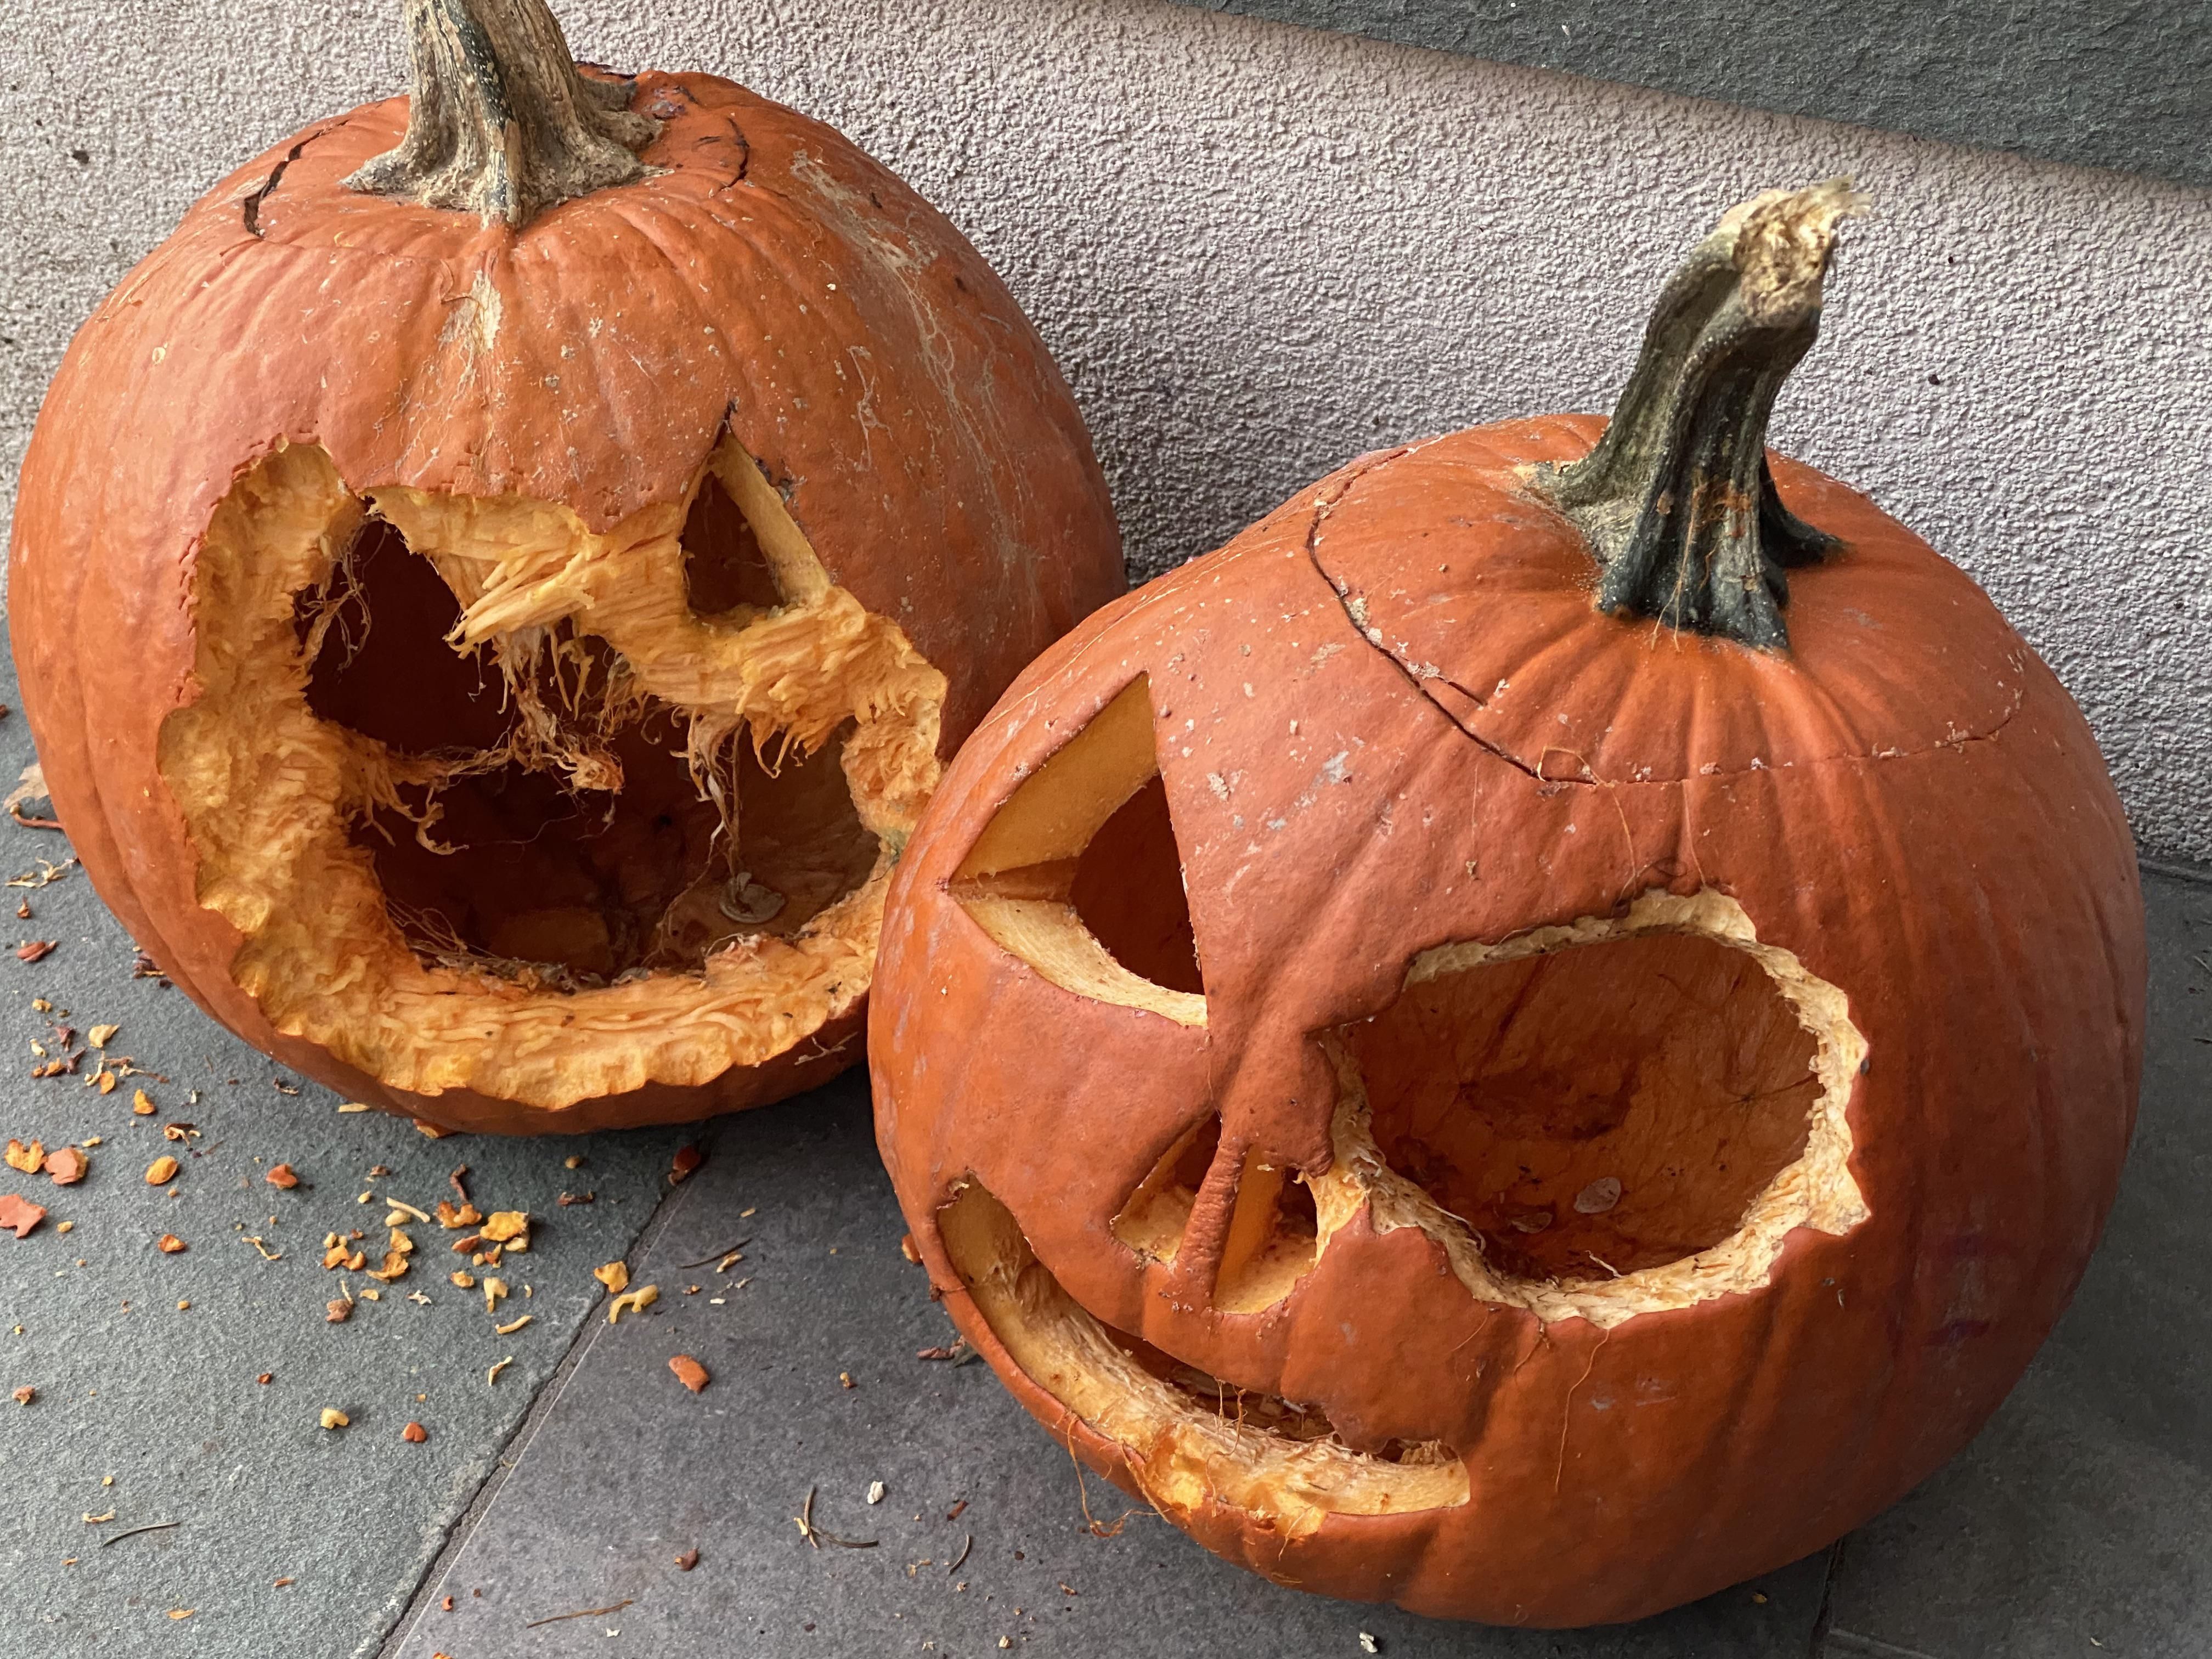 A squirrel ate it’s face so my kids now call it - Zombie Pumpkin